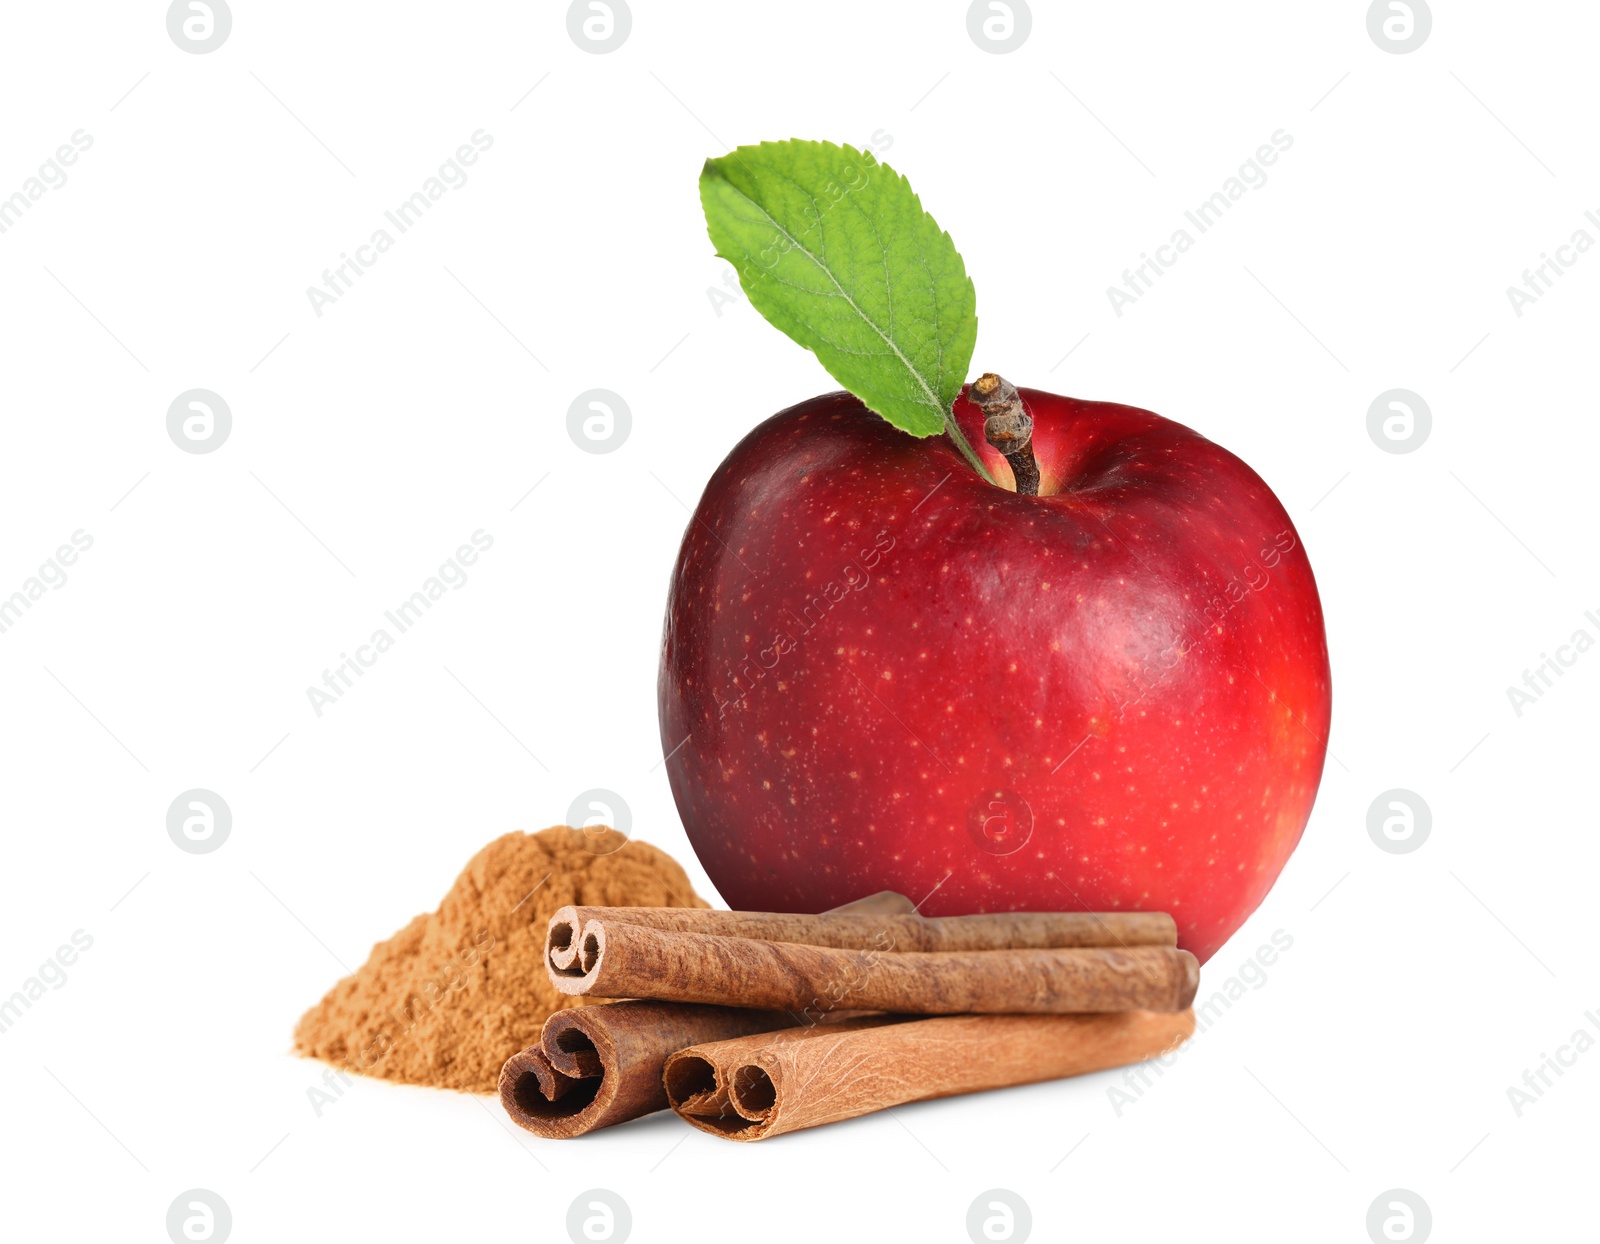 Image of Aromatic cinnamon sticks, powder and red apple isolated on white